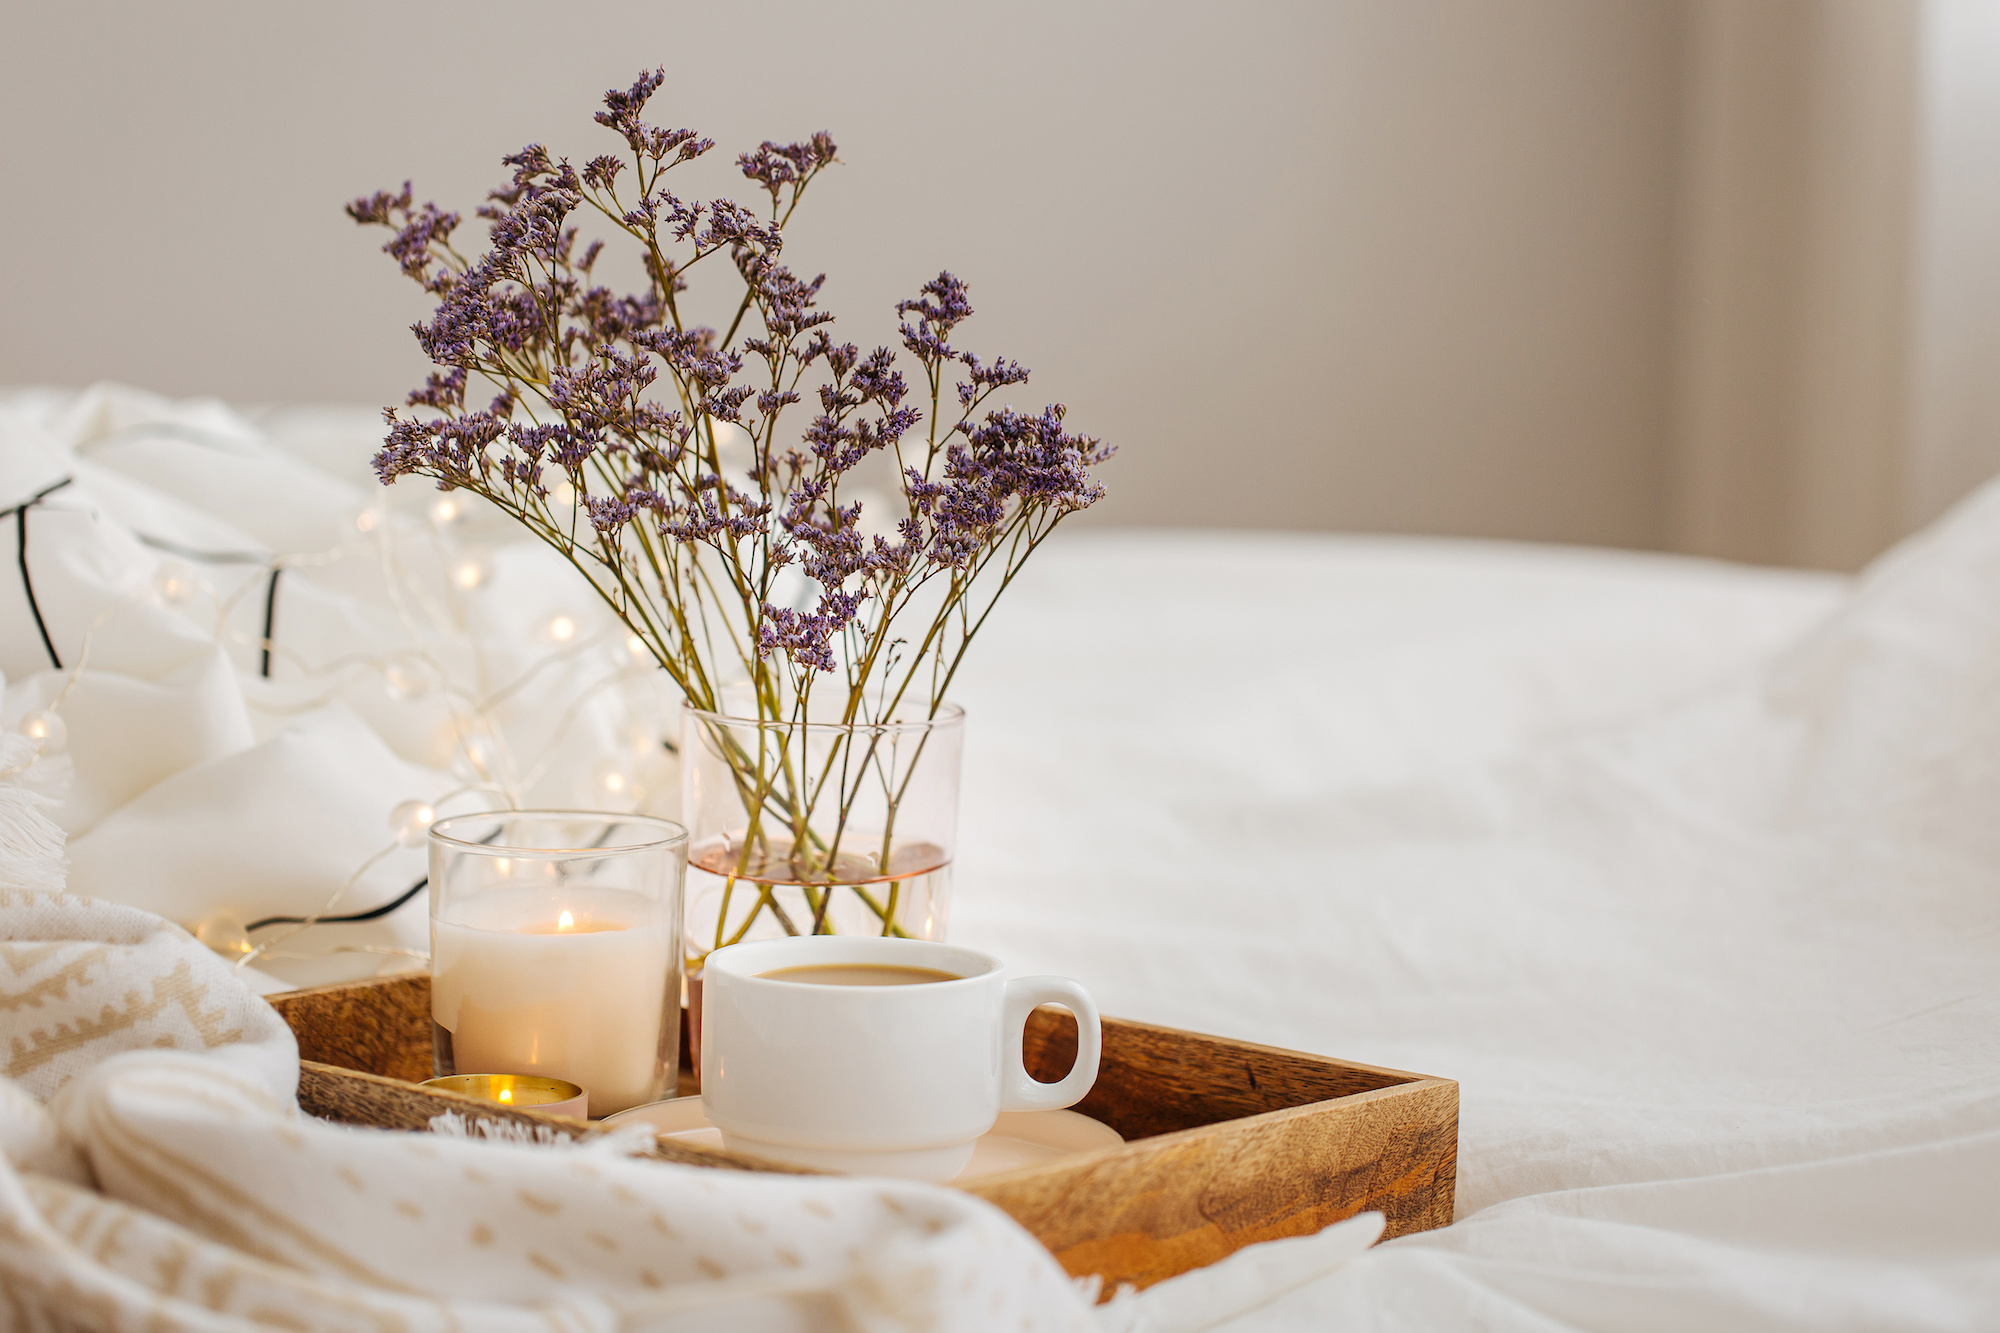 Tray set on a bed with a candle, flowers and a mug. 